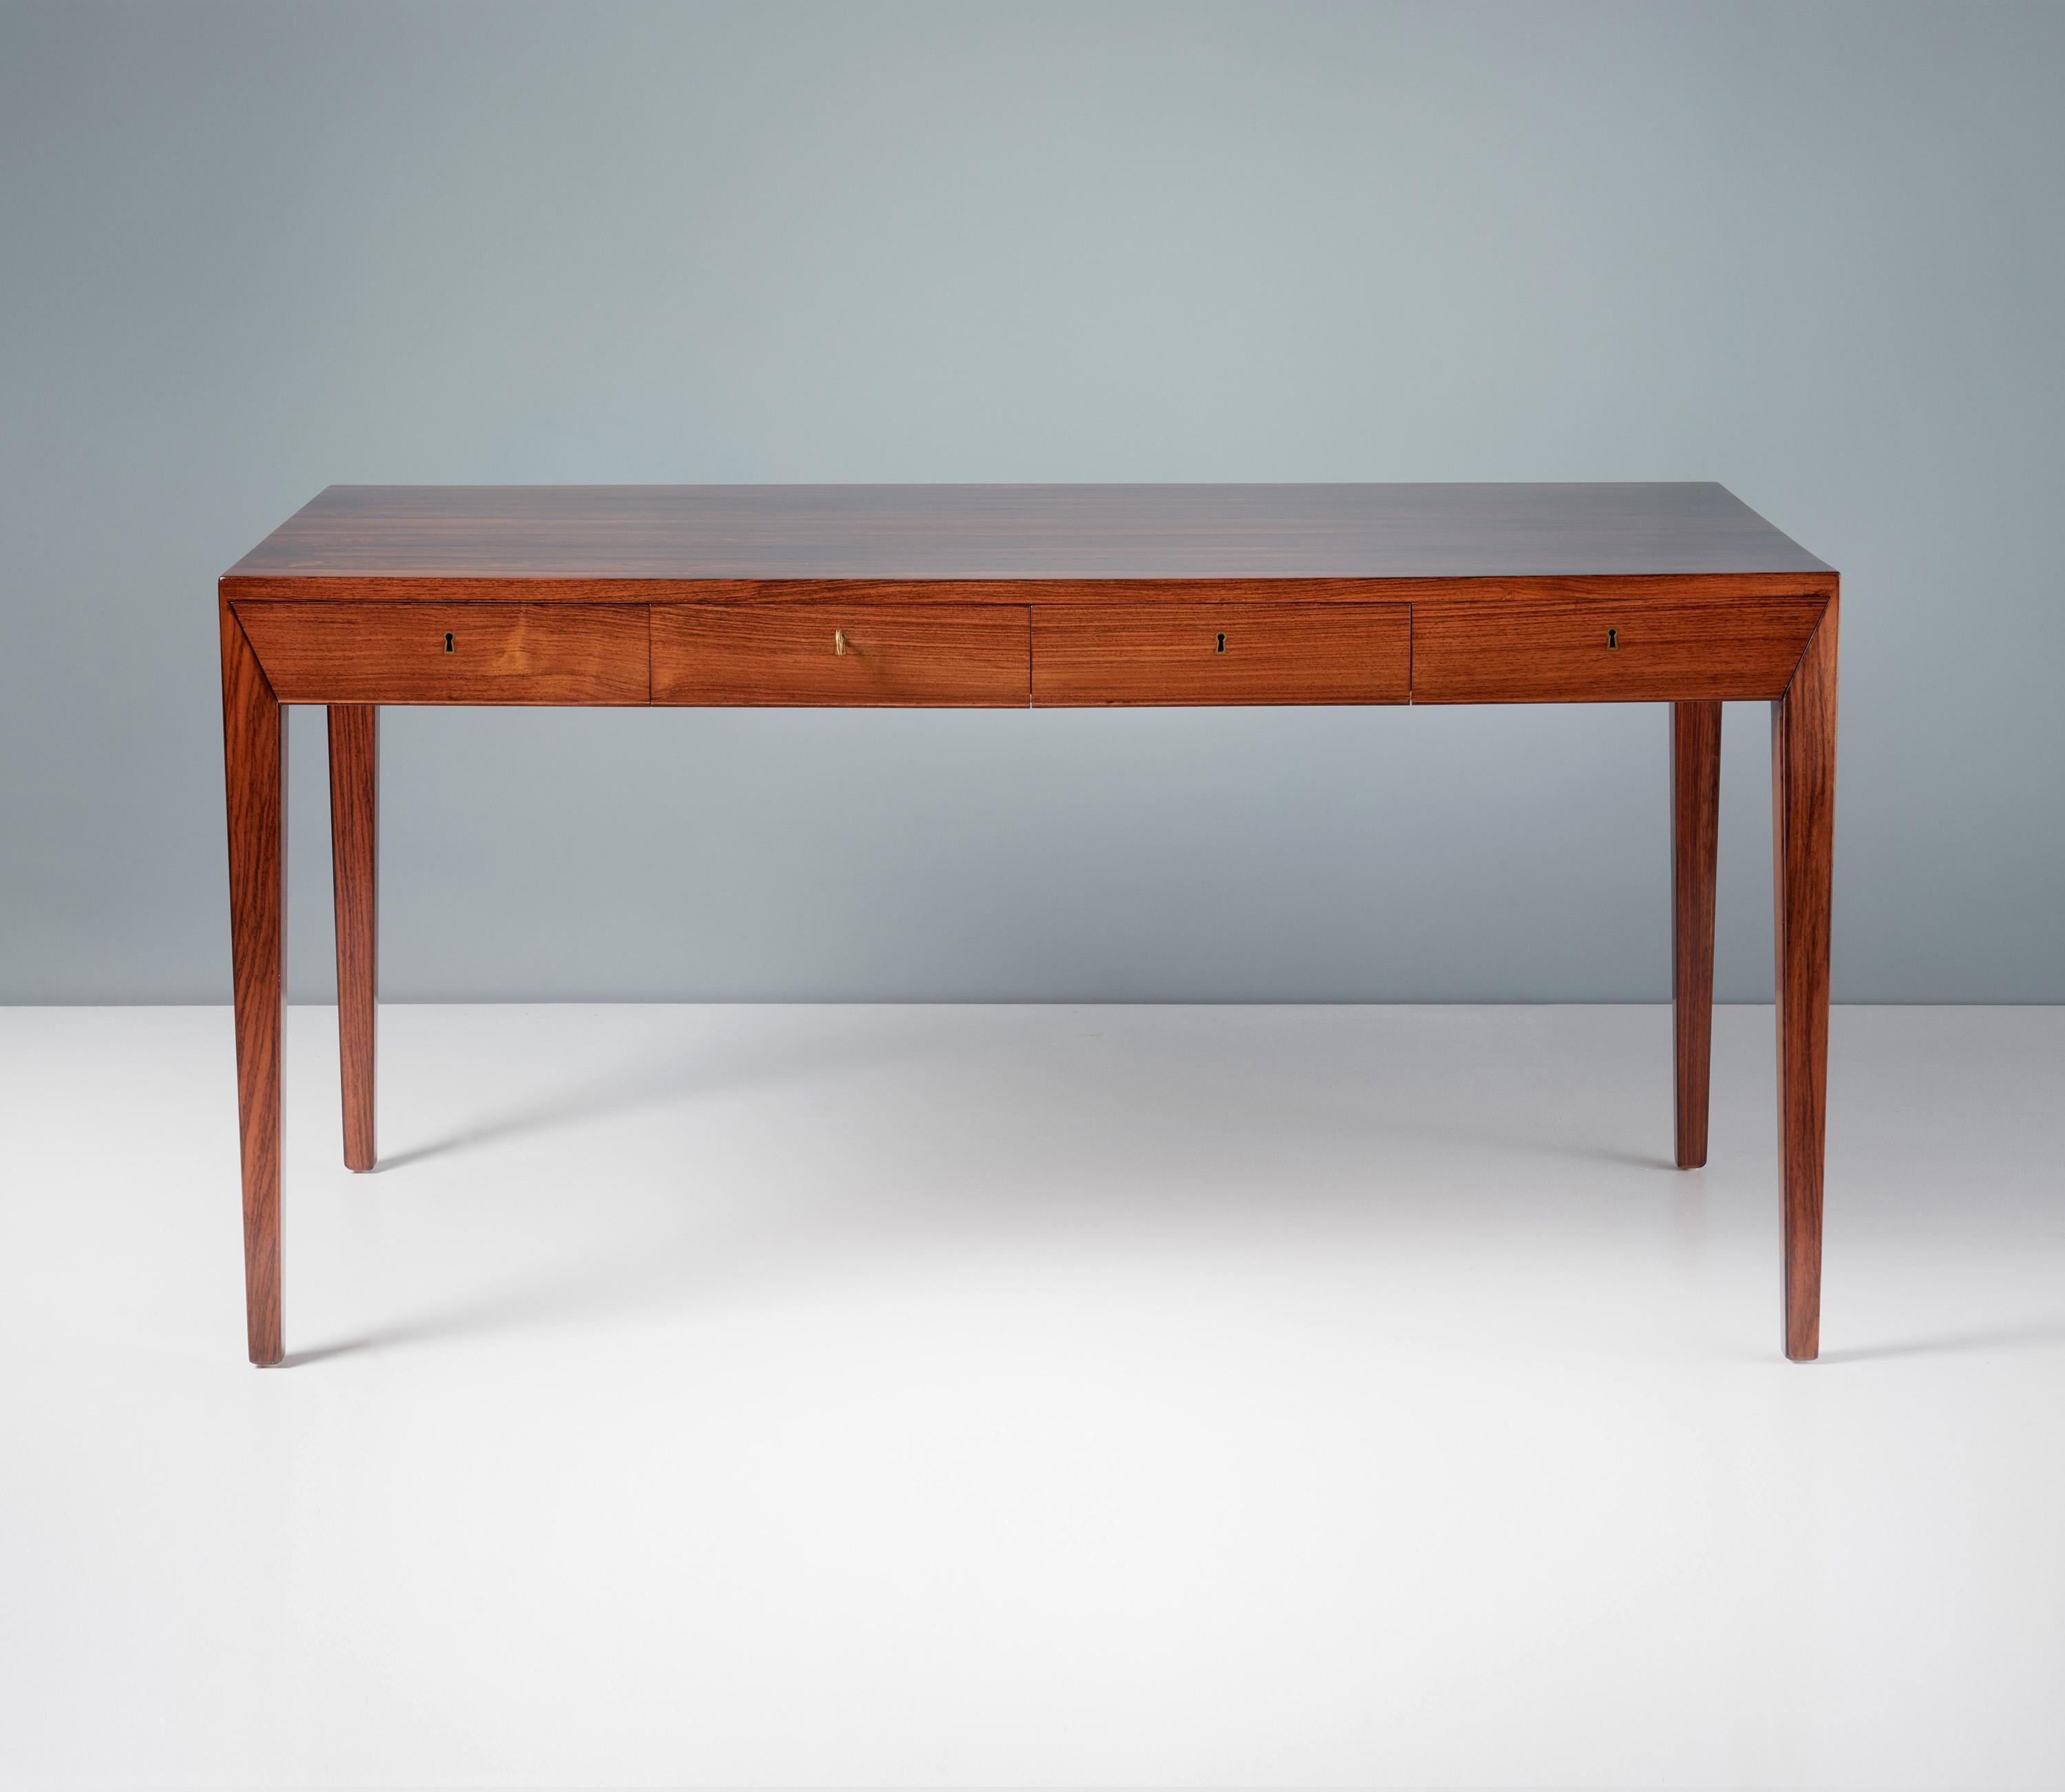 Severin Hansen Jnr. - Model 36 Writing Desk

This iconic desk waa designed by Severin Hansen Jnr. in 1958 when he was in his early 20s. The desk was produced by cabinetmakers Haslev Mobelsnedkeri in Denmark. This piece is made from. solid and